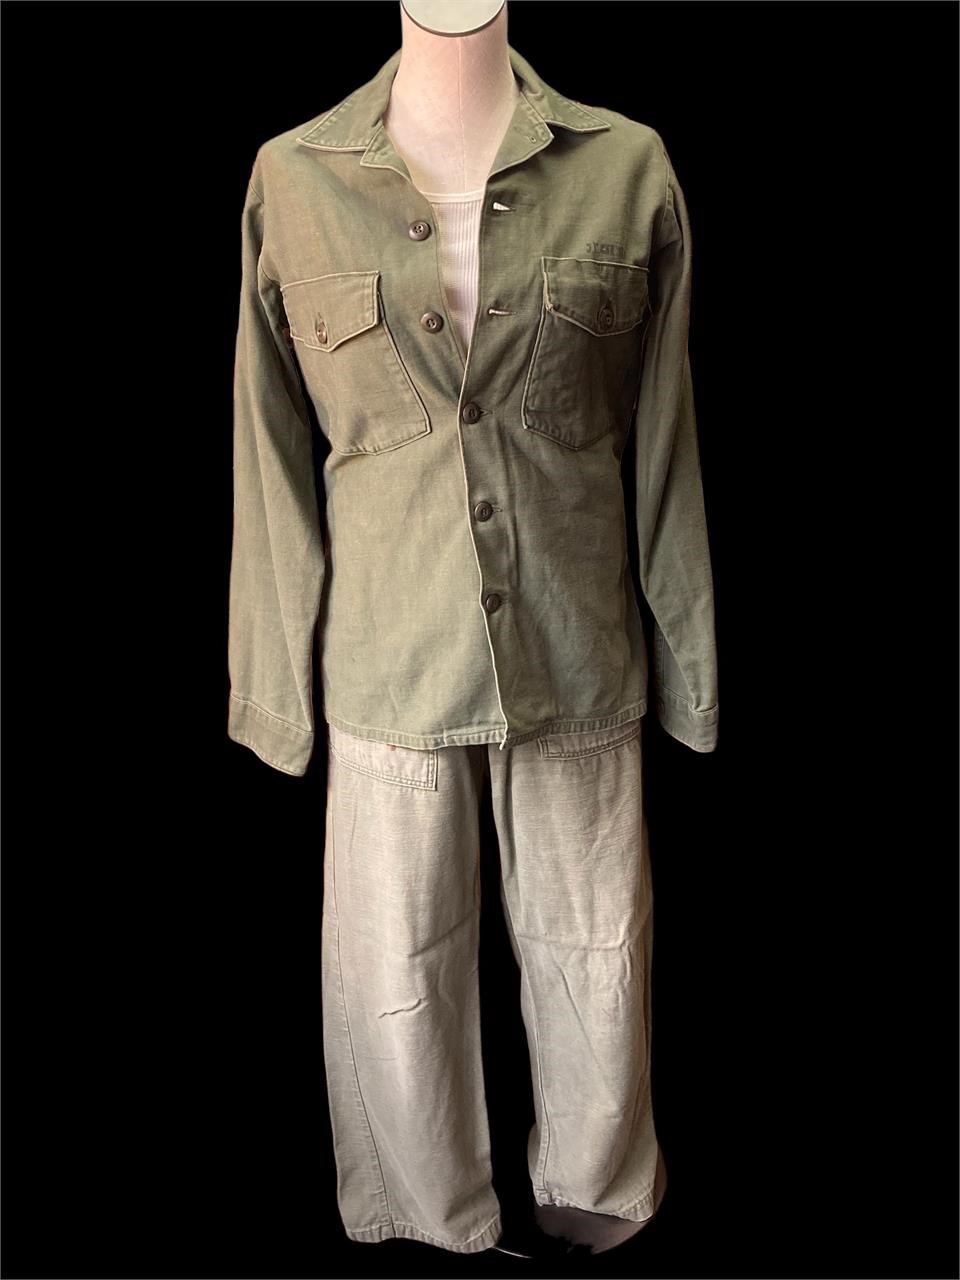 US Army Fatigues